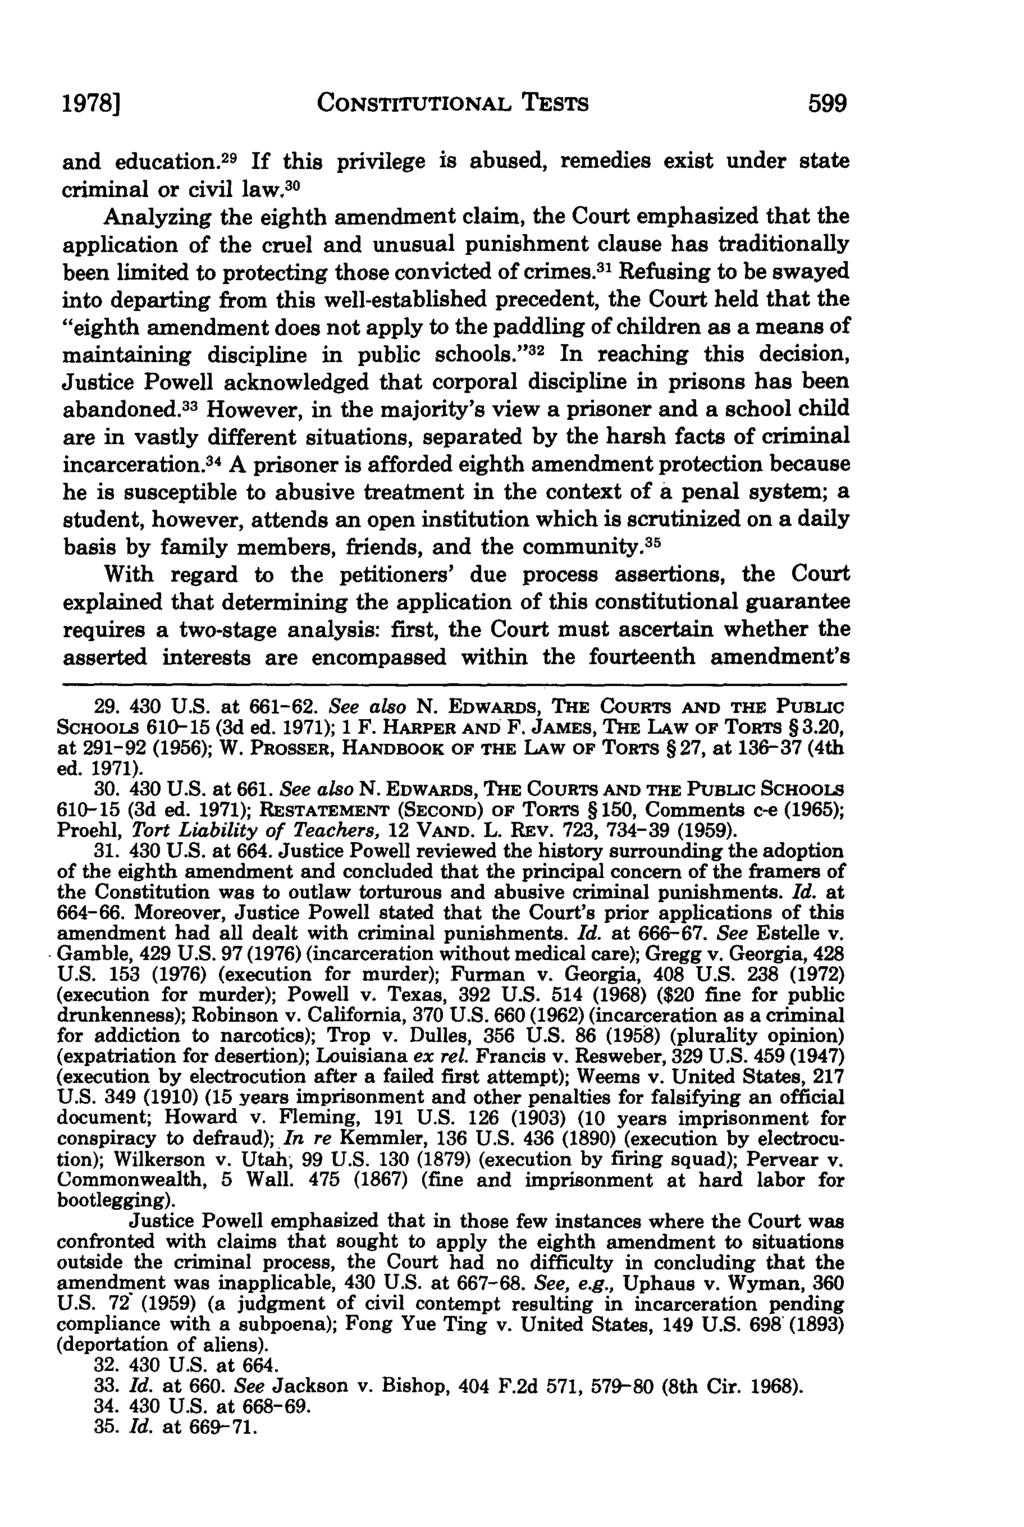 1978] CONSTITUTIONAL TESTS and education. 29 If this privilege is abused, remedies exist under state criminal or civil law.